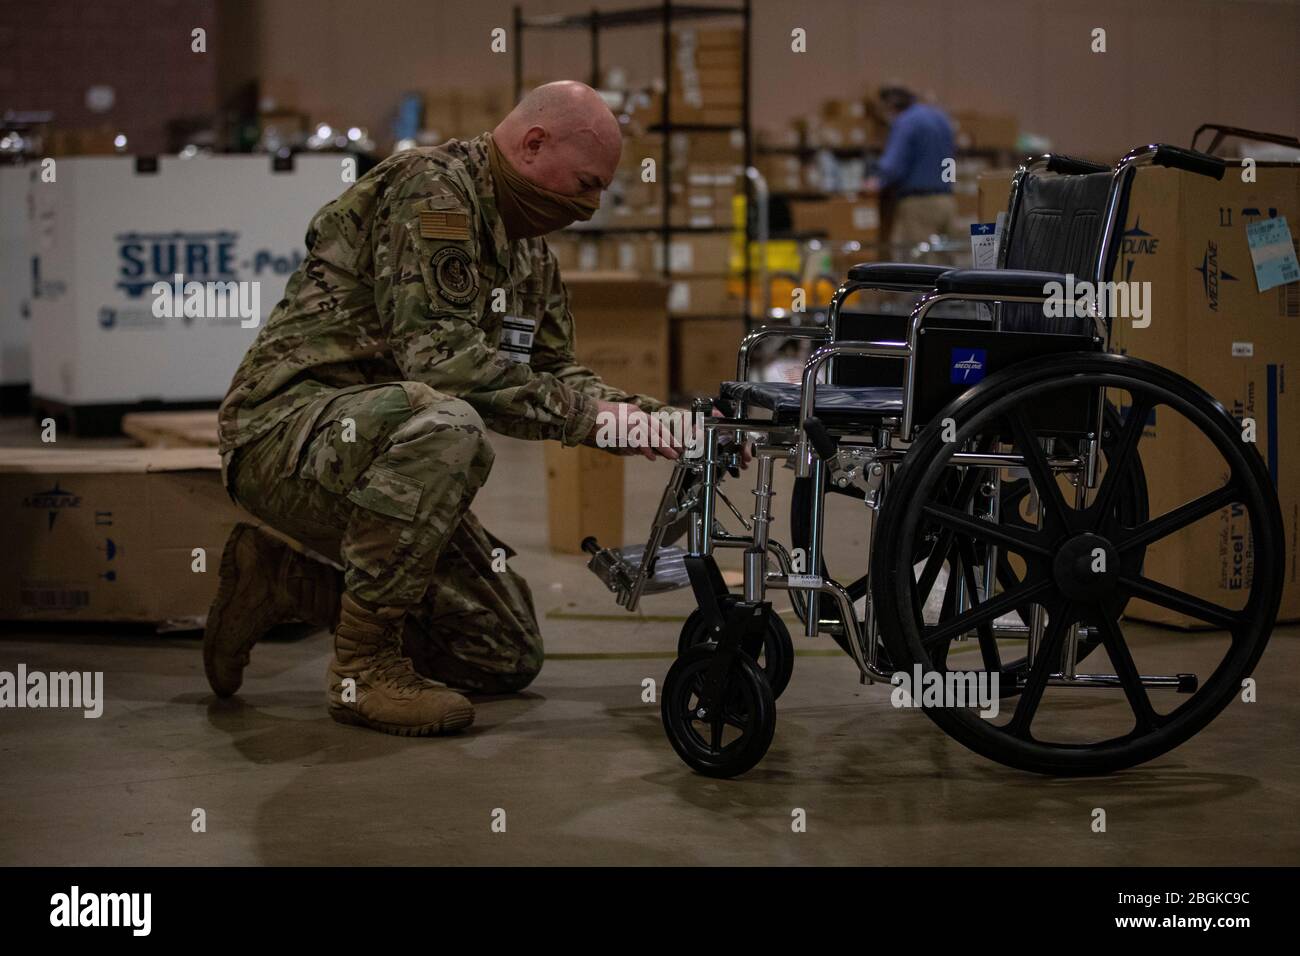 U.S. Air Force Master Sgt. Richard Thomas, with the New Jersey Air National Guard’s 108th Wing, assembles a wheelchair at a Federal Medical Station set up at the Atlantic City Convention Center in Atlantic City, N.J., April 15, 2020. (U.S. Air National Guard photo by Master Sgt. Matt Hecht) Stock Photo